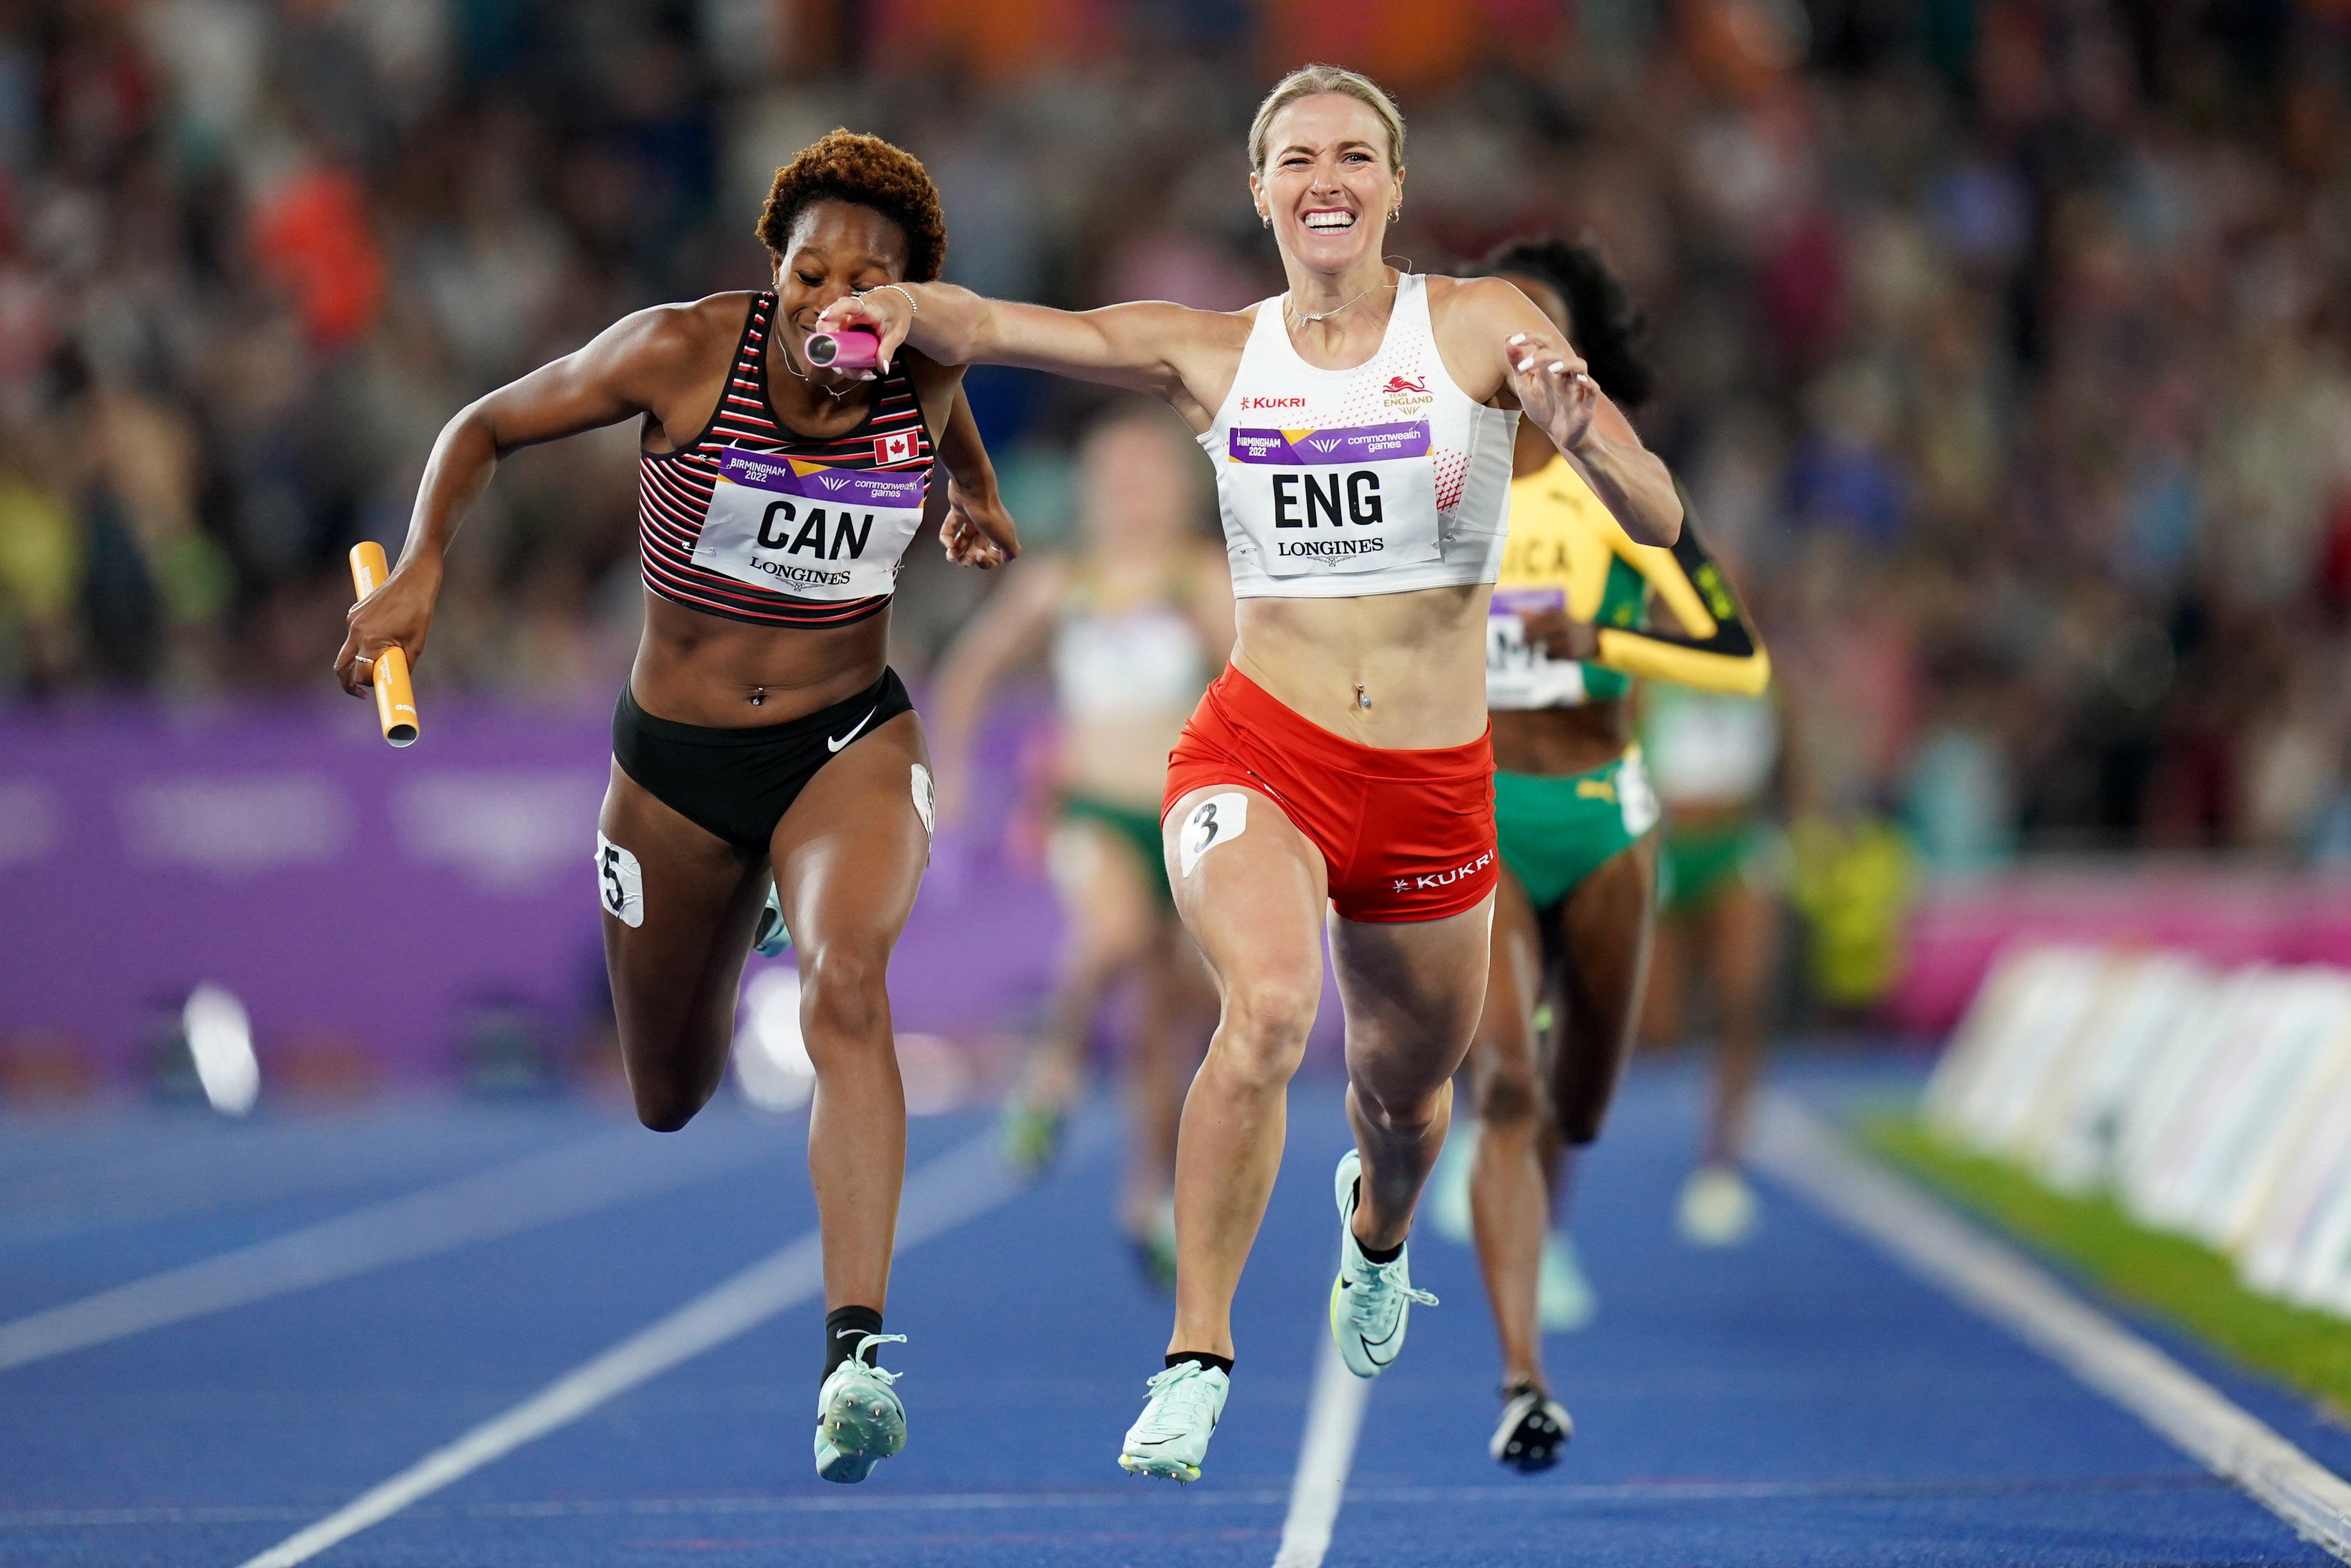 England’s Jessie Knight in the women’s 4x400m relay final in the Commonwealth Games at Alexander Stadium (Jacob King/PA)